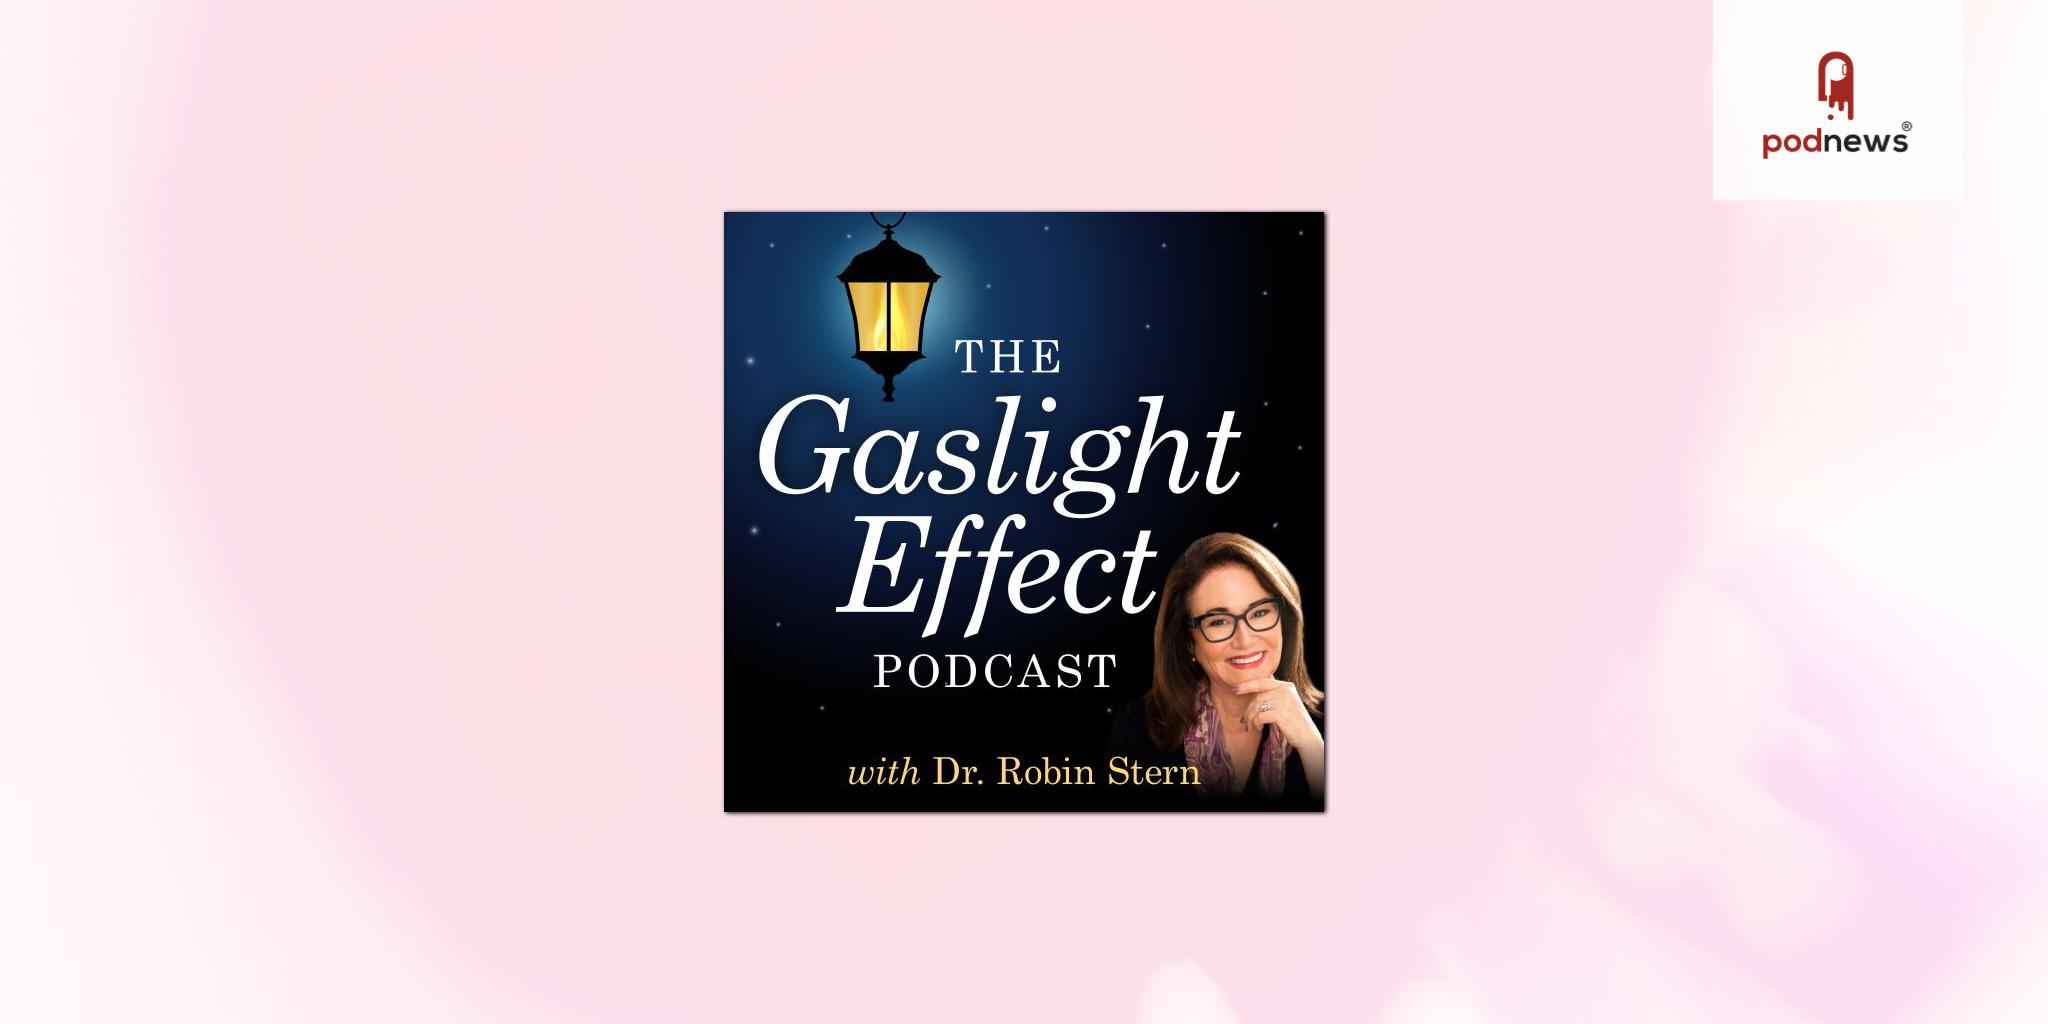 The Gaslight Effect podcast debuts